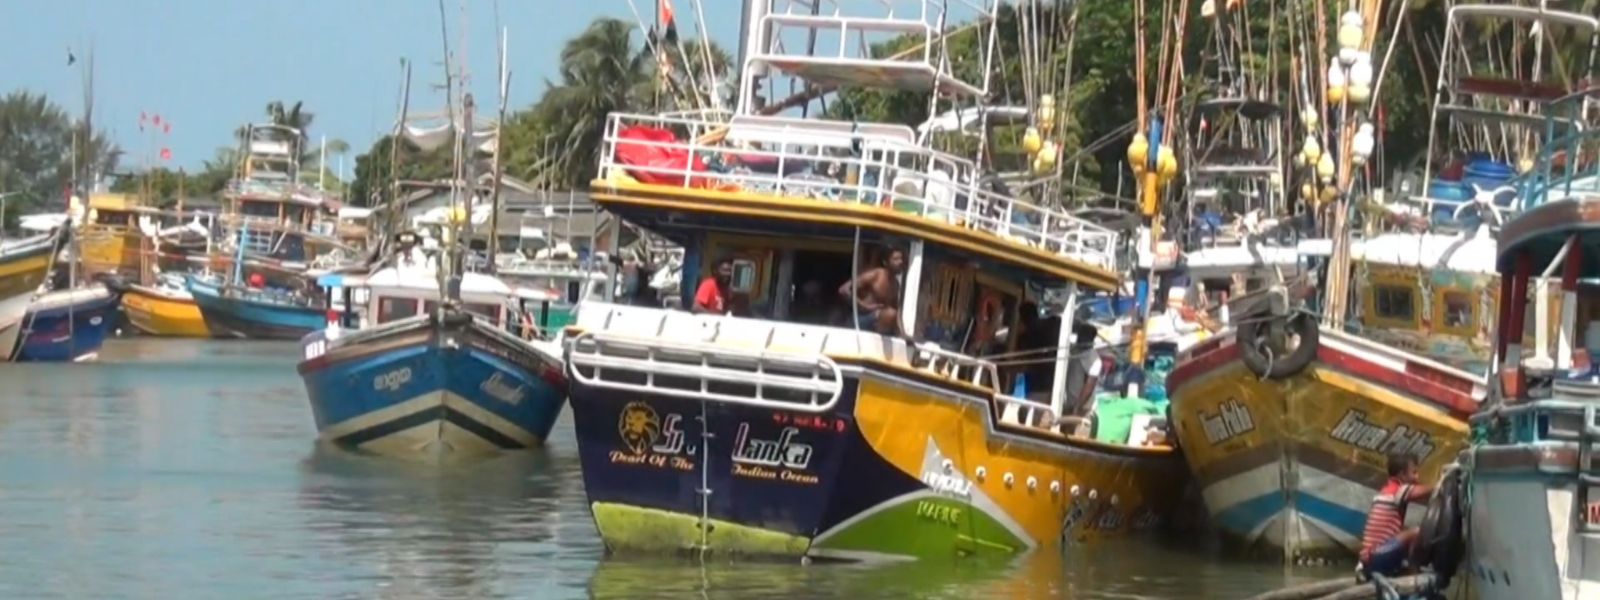 4 fishermen dead after consuming unknown liquid